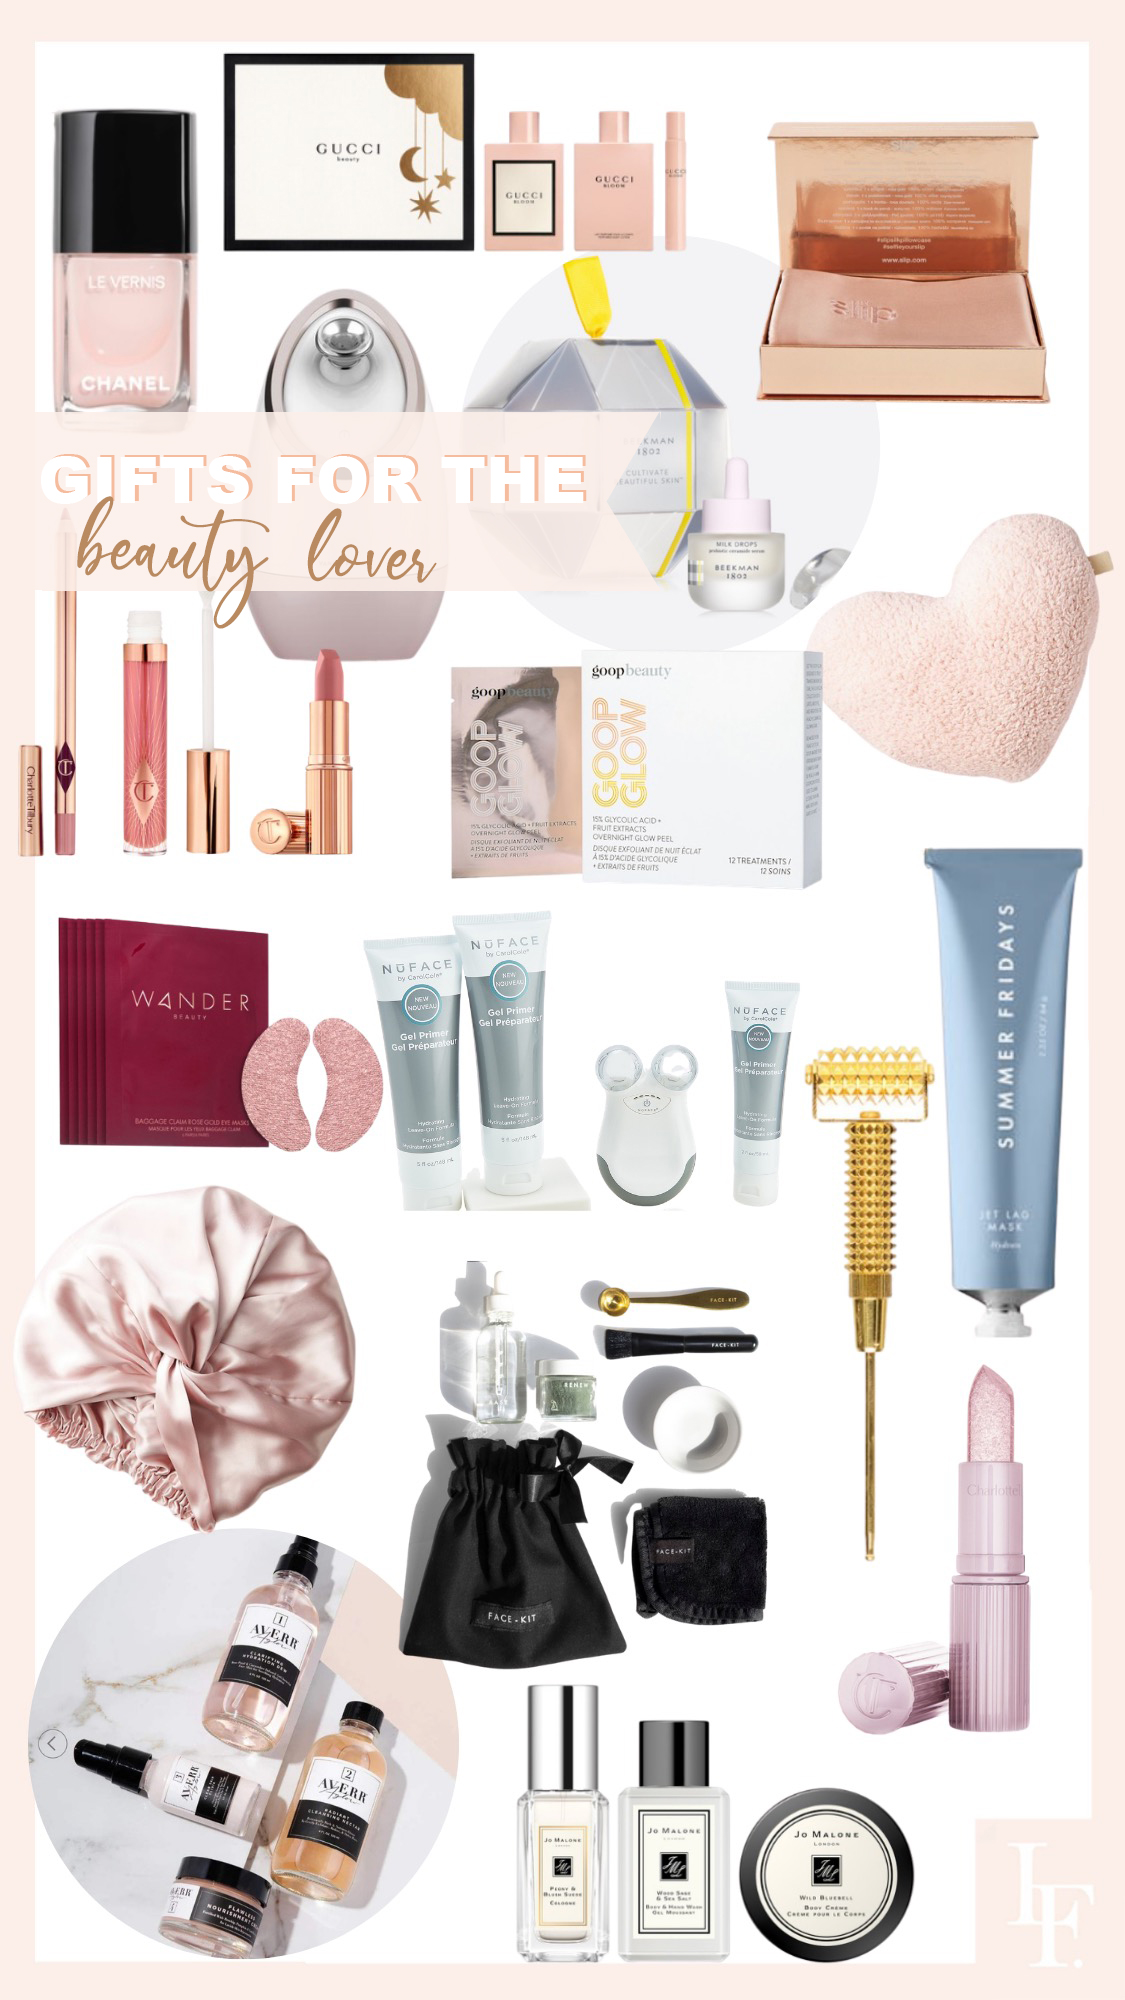 2020 Gift Guide for the beauty lover, featured by San Francisco fashion blogger Lombard and Fifth. Beauty gift ideas like Nuface device, silk face mask, Charlotte Tilbury make up.